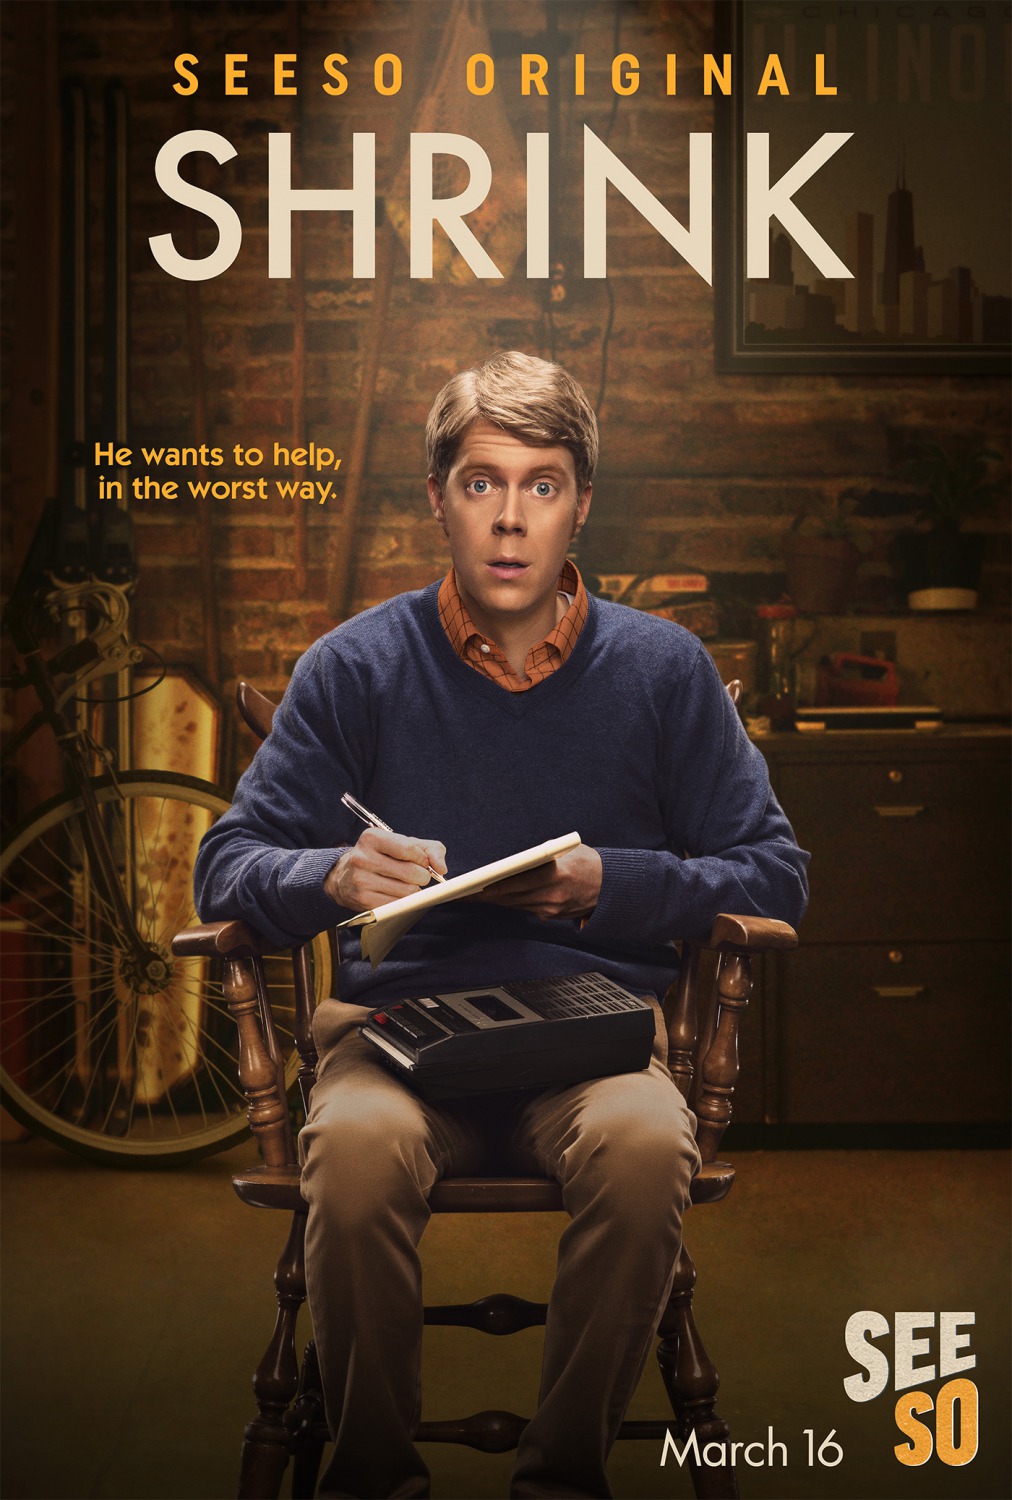 SHRINK New Comedy Series Trailer and Poster The Entertainment Factor